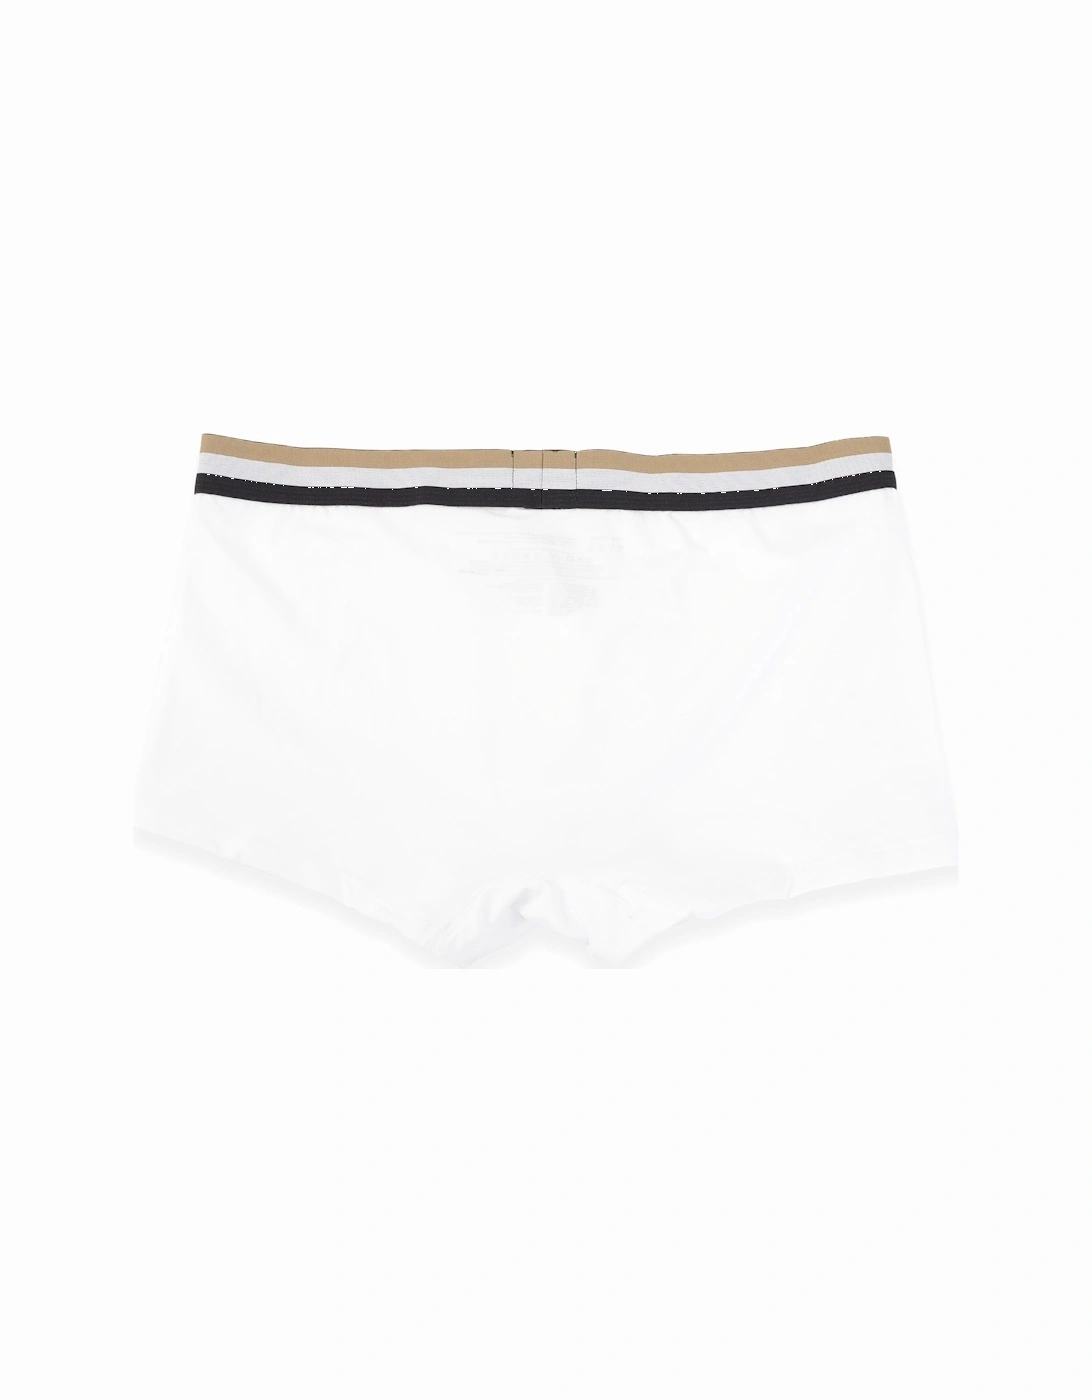 Trunk 3 Pack Boxer Shorts White